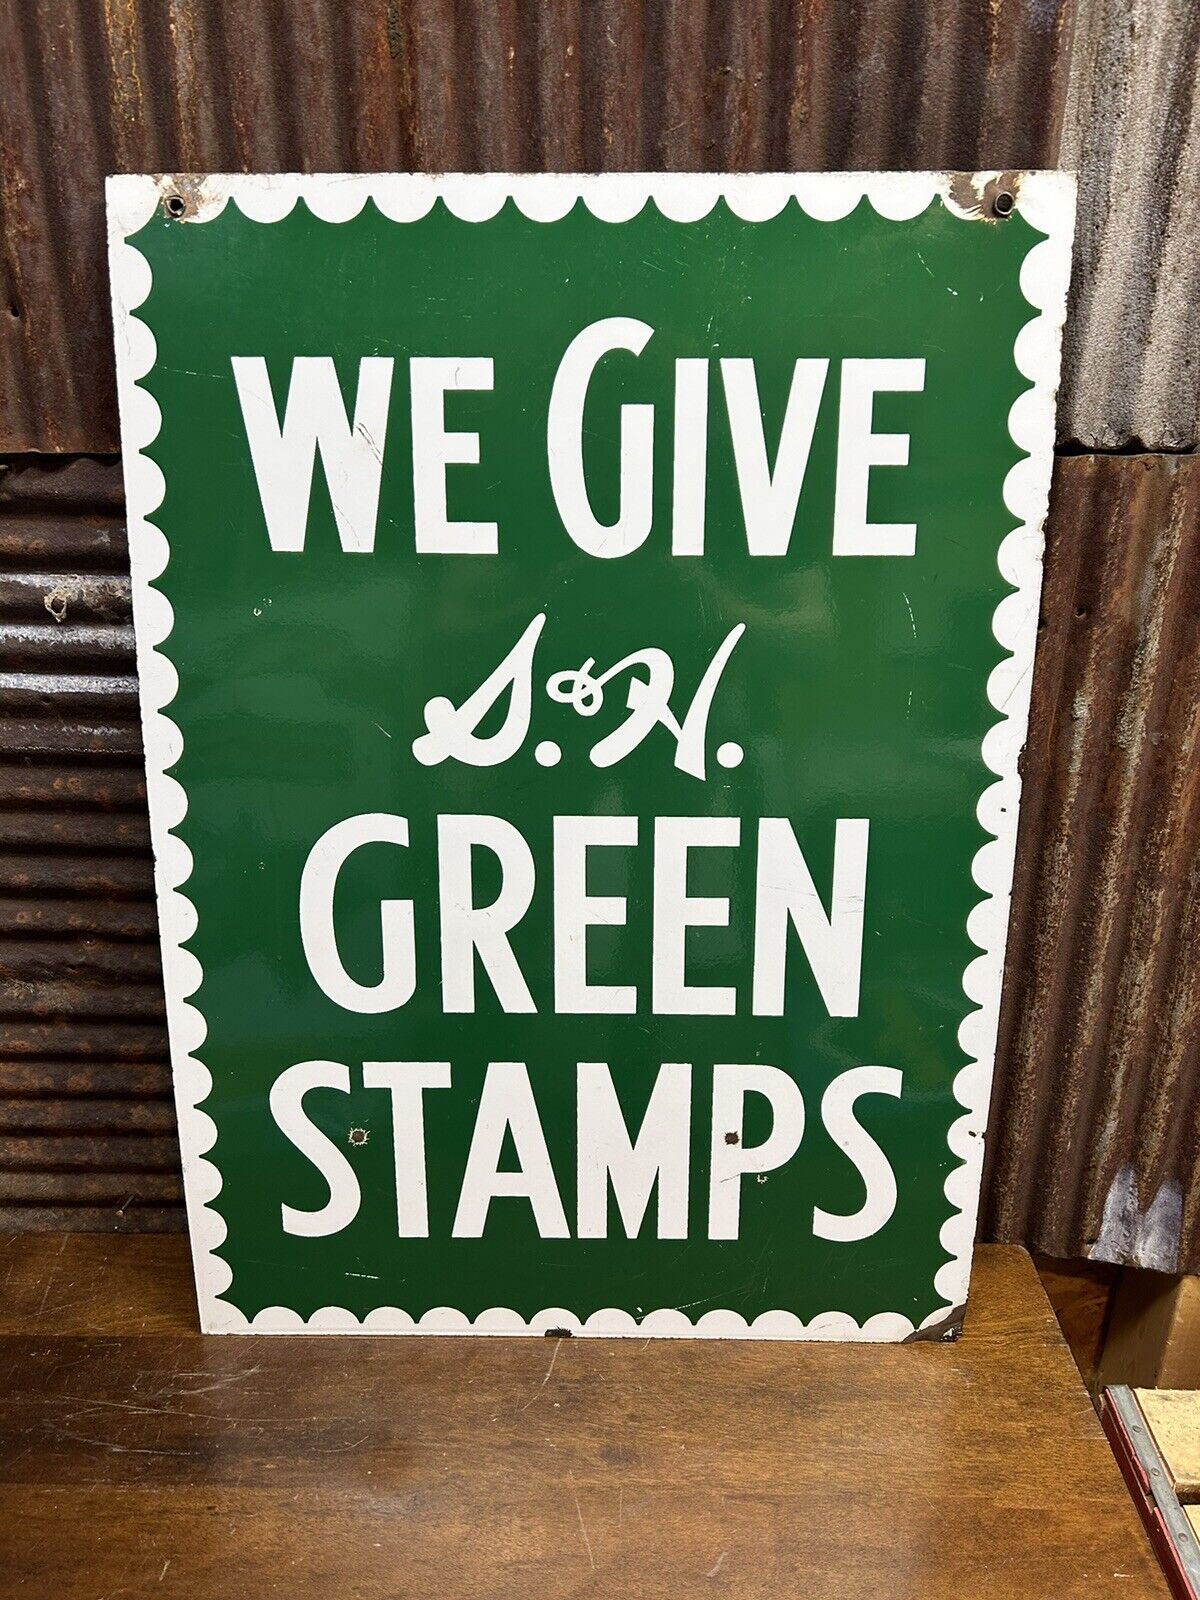 ANTIQUE DOUBLE PORCELAIN SIDED S&H GREEN STAMPS FOOD GROCERY STORE ART SIGN